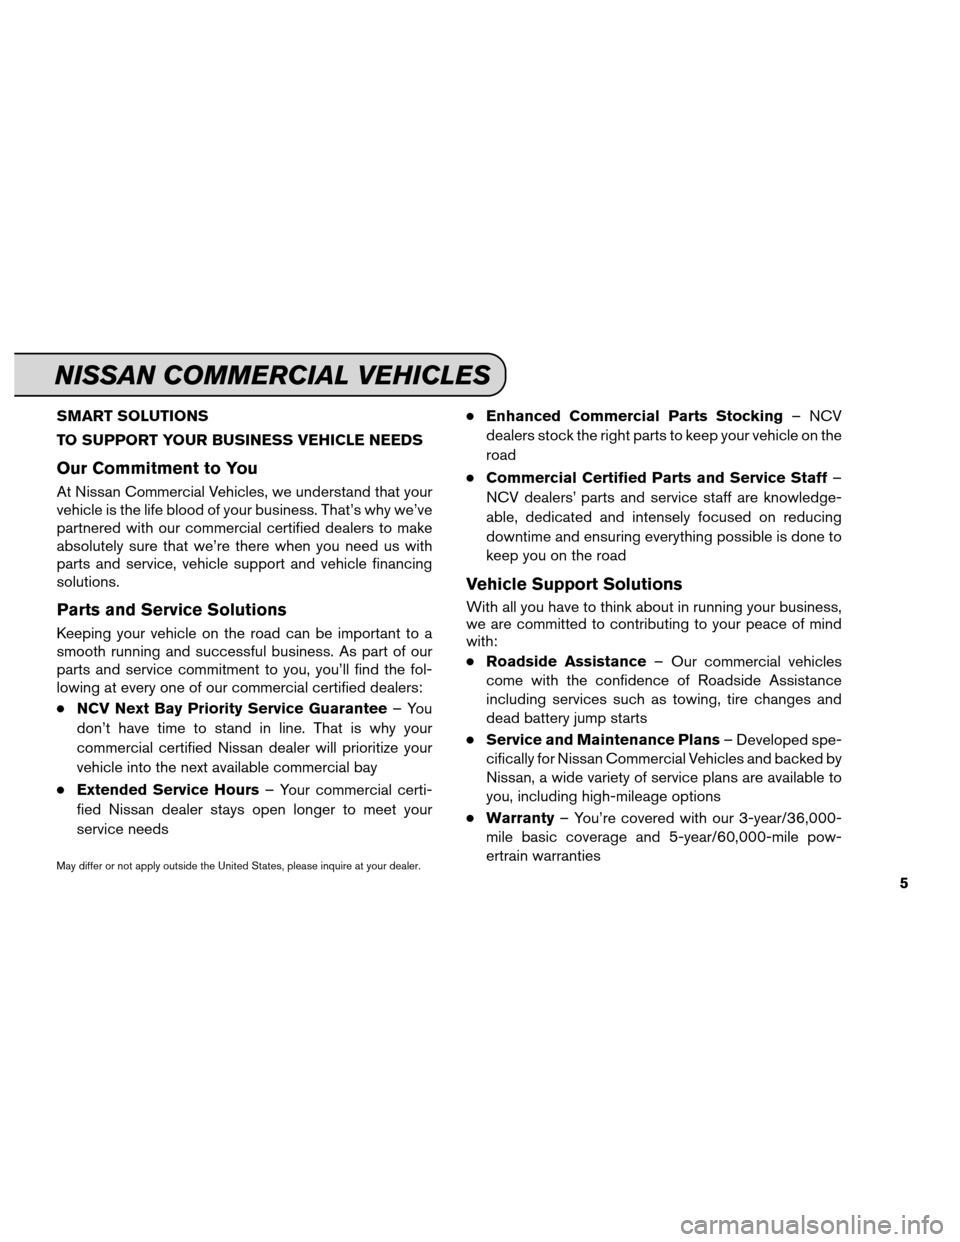 NISSAN MAXIMA 2013 A35 / 7.G Service And Maintenance Guide SMART SOLUTIONS
TO SUPPORT YOUR BUSINESS VEHICLE NEEDS
Our Commitment to You
At Nissan Commercial Vehicles, we understand that your
vehicle is the life blood of your business. That’s why we’ve
par